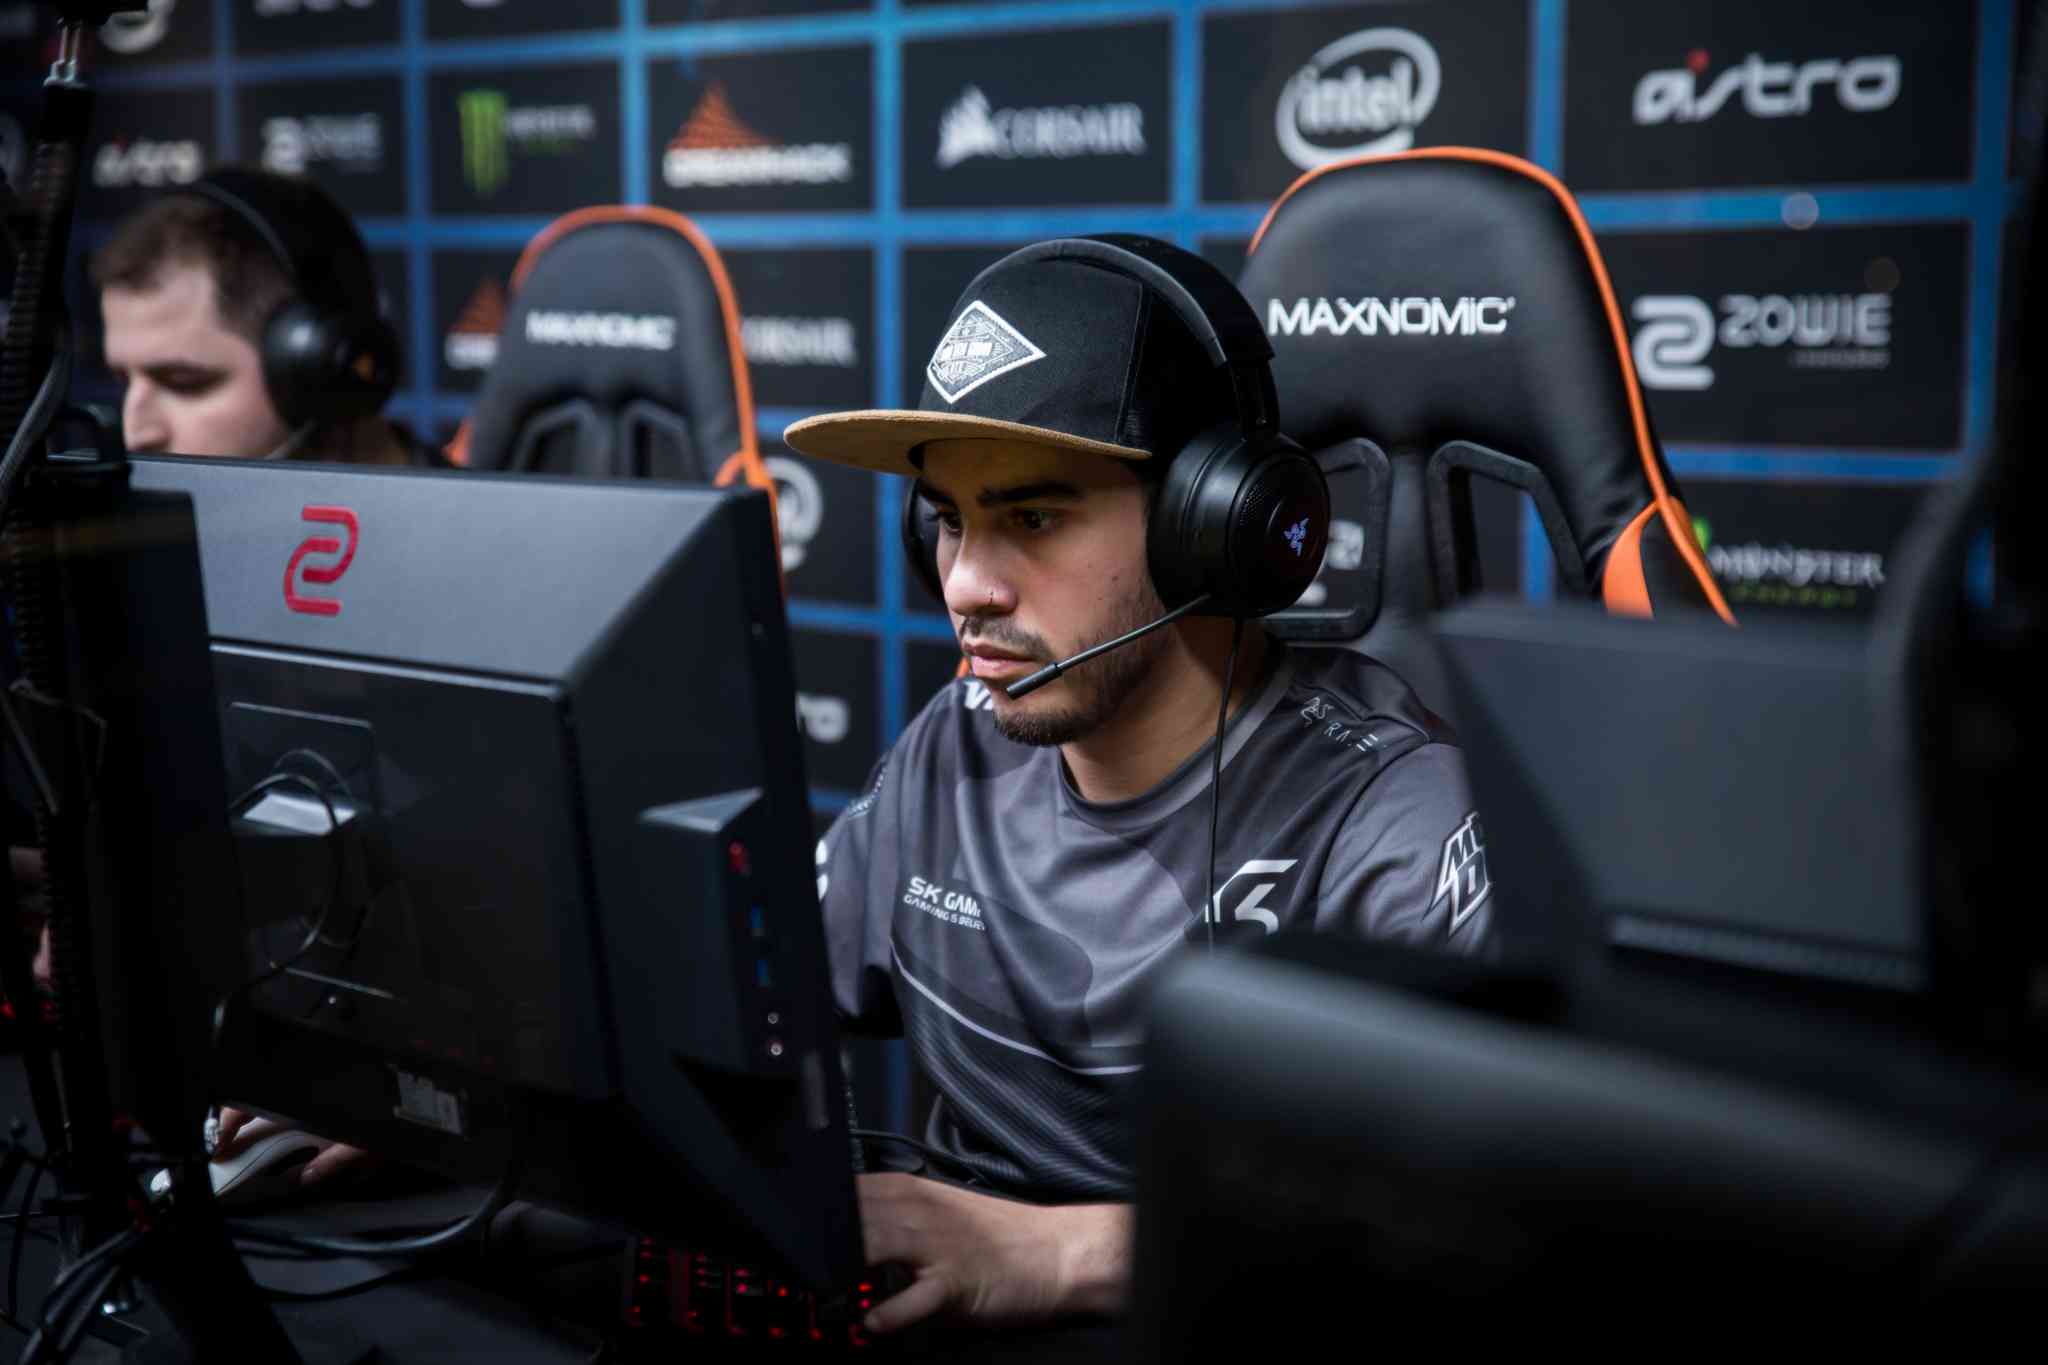 Coldzera will go down as a top 10 player in CS:GO History